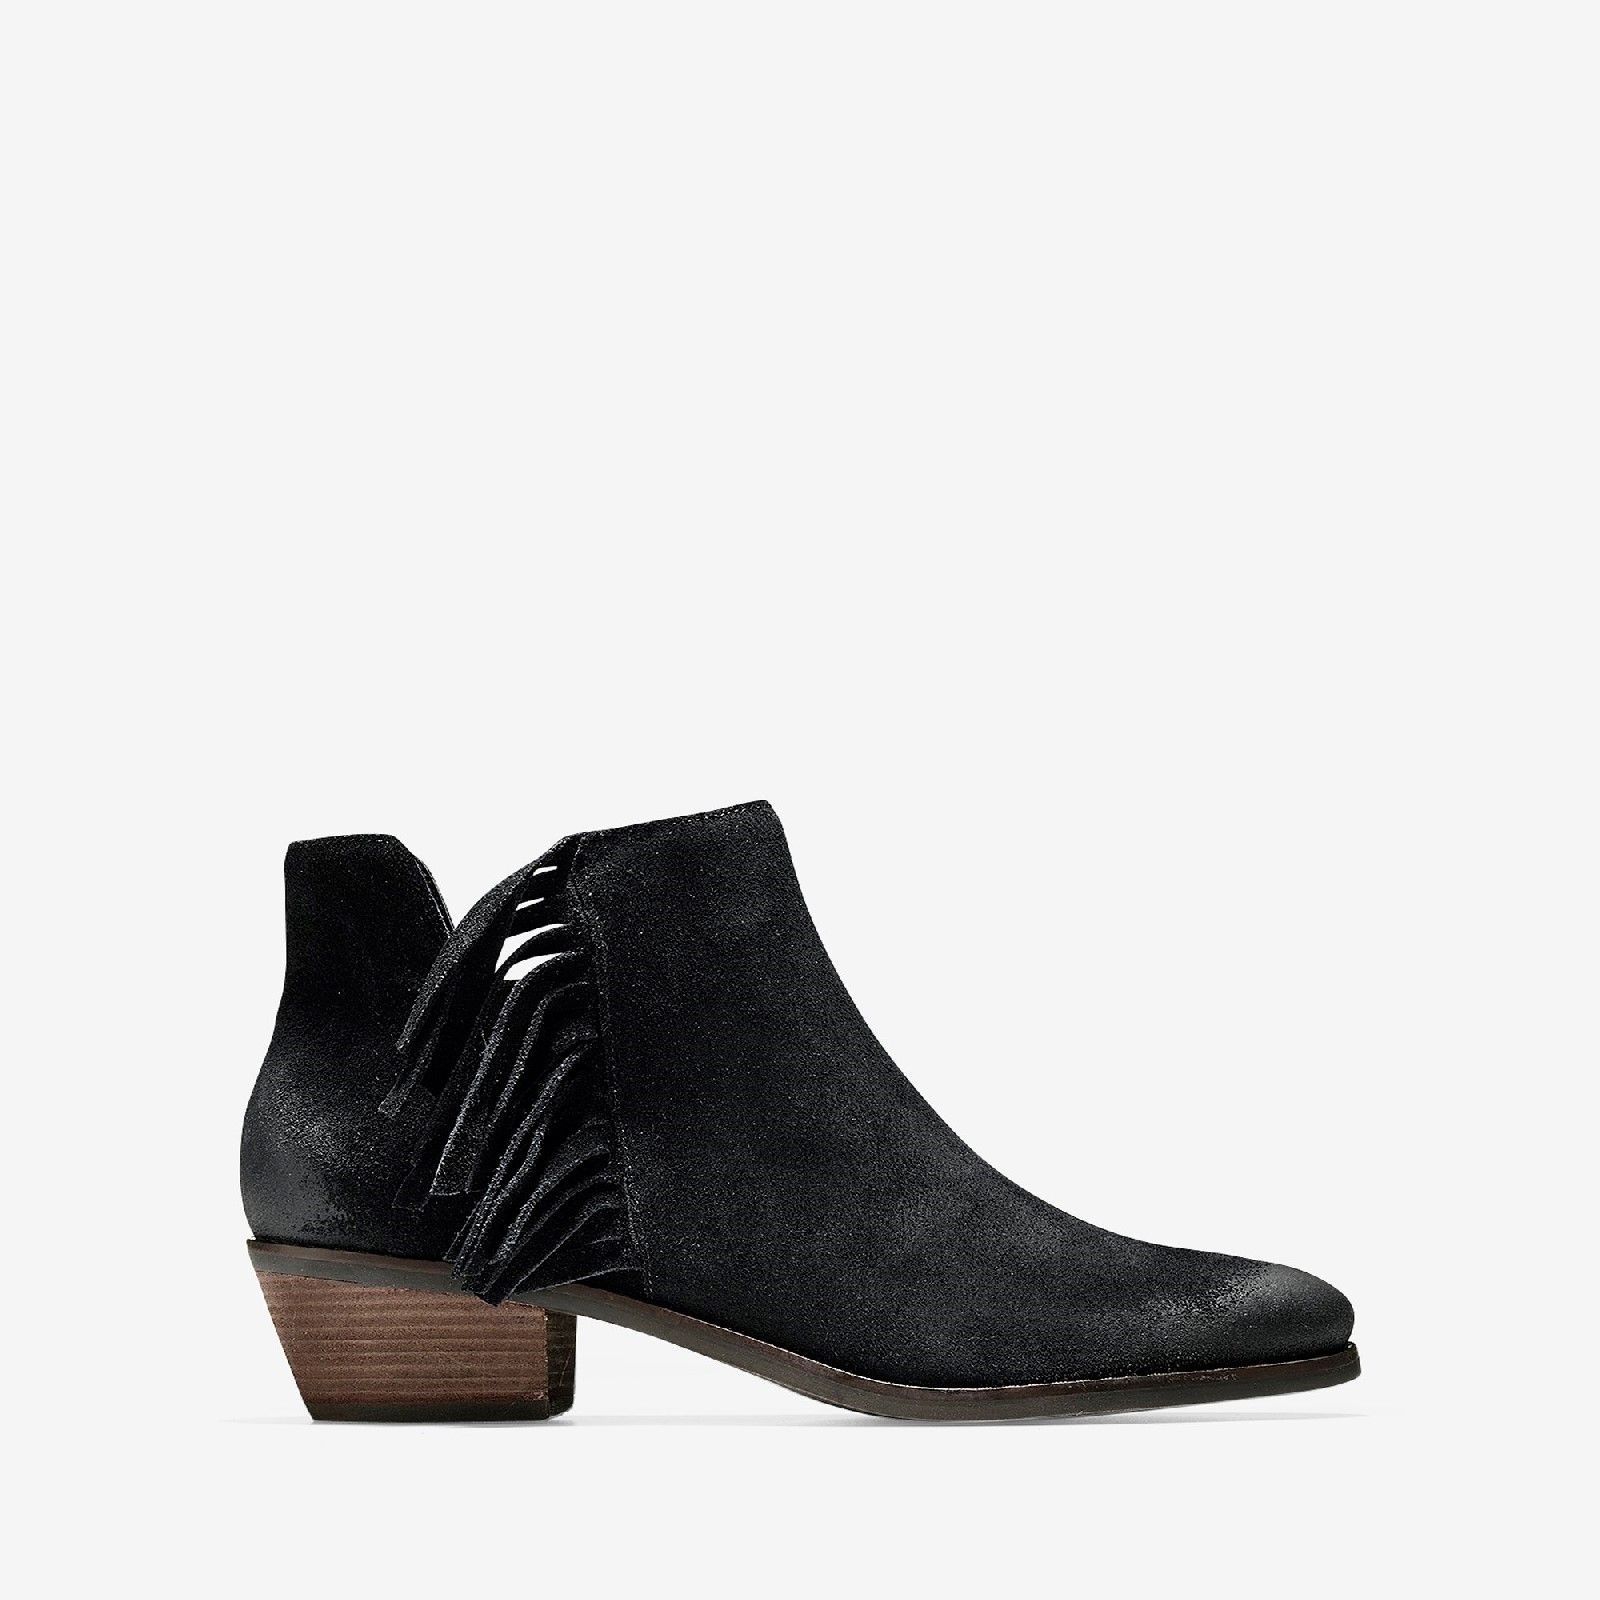 These urban, cowgirl-chic ankle boots are crafted in rich leather and feature dual side cut-outs that add the perfect amount of edgy flair. Suede upper with fringe detail and hidden side gore for easy entry.. 
Fully lined.. 
Full rubber outsole with welt and GRAND/OS technology for comfort and stability.. 
45mm stacked heel..